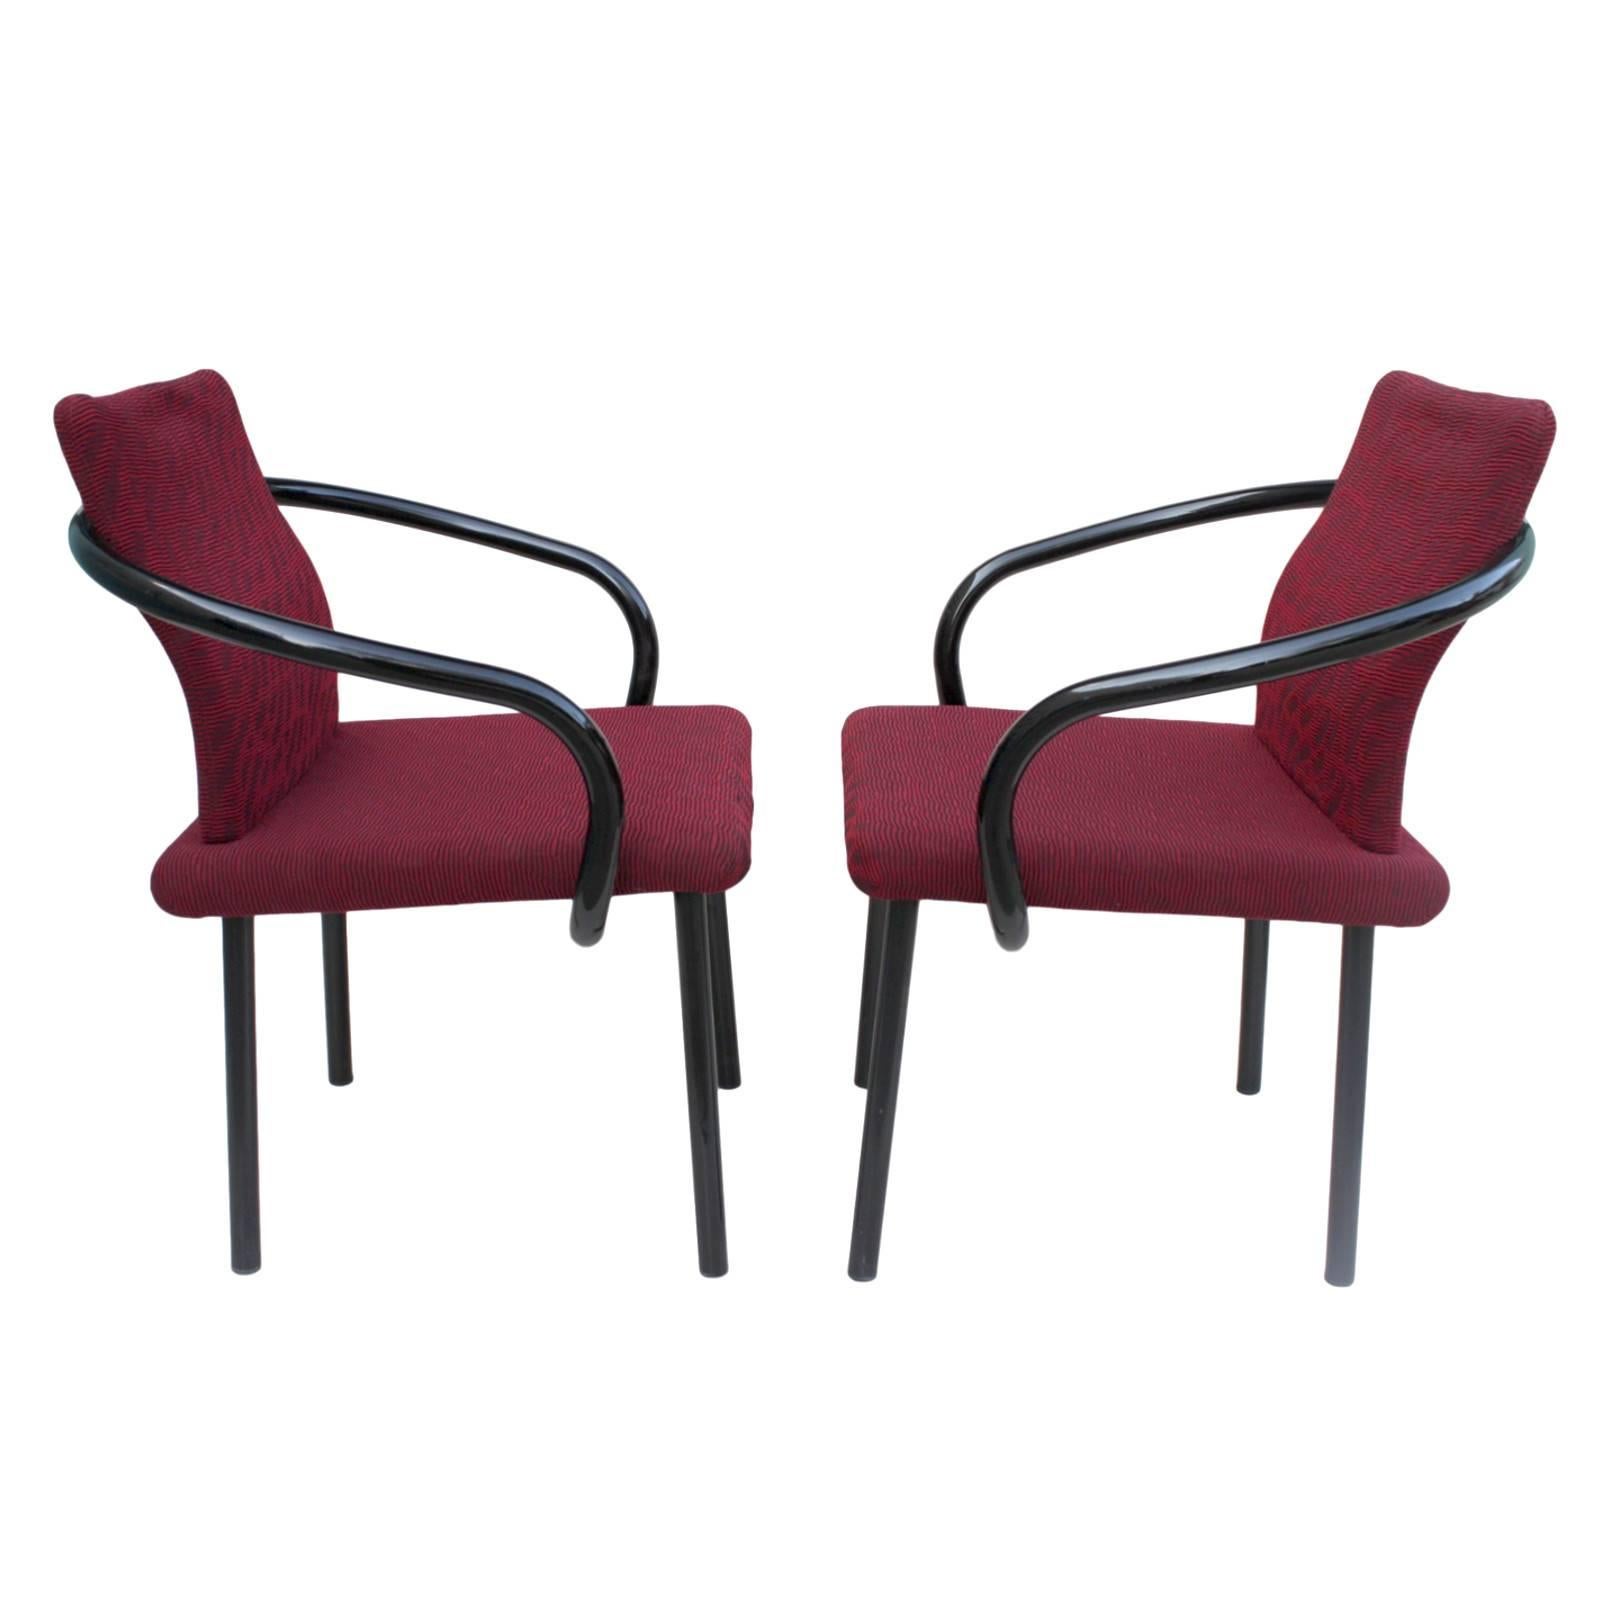 This awesome pair of of Manadarin side chairs is were designed by Ettore Sottsass for Knoll, chairs feature curvaceous tubular steel arms finished in gloss black, matte-black straight-tube legs and that fantastic original burgundy upholstery.